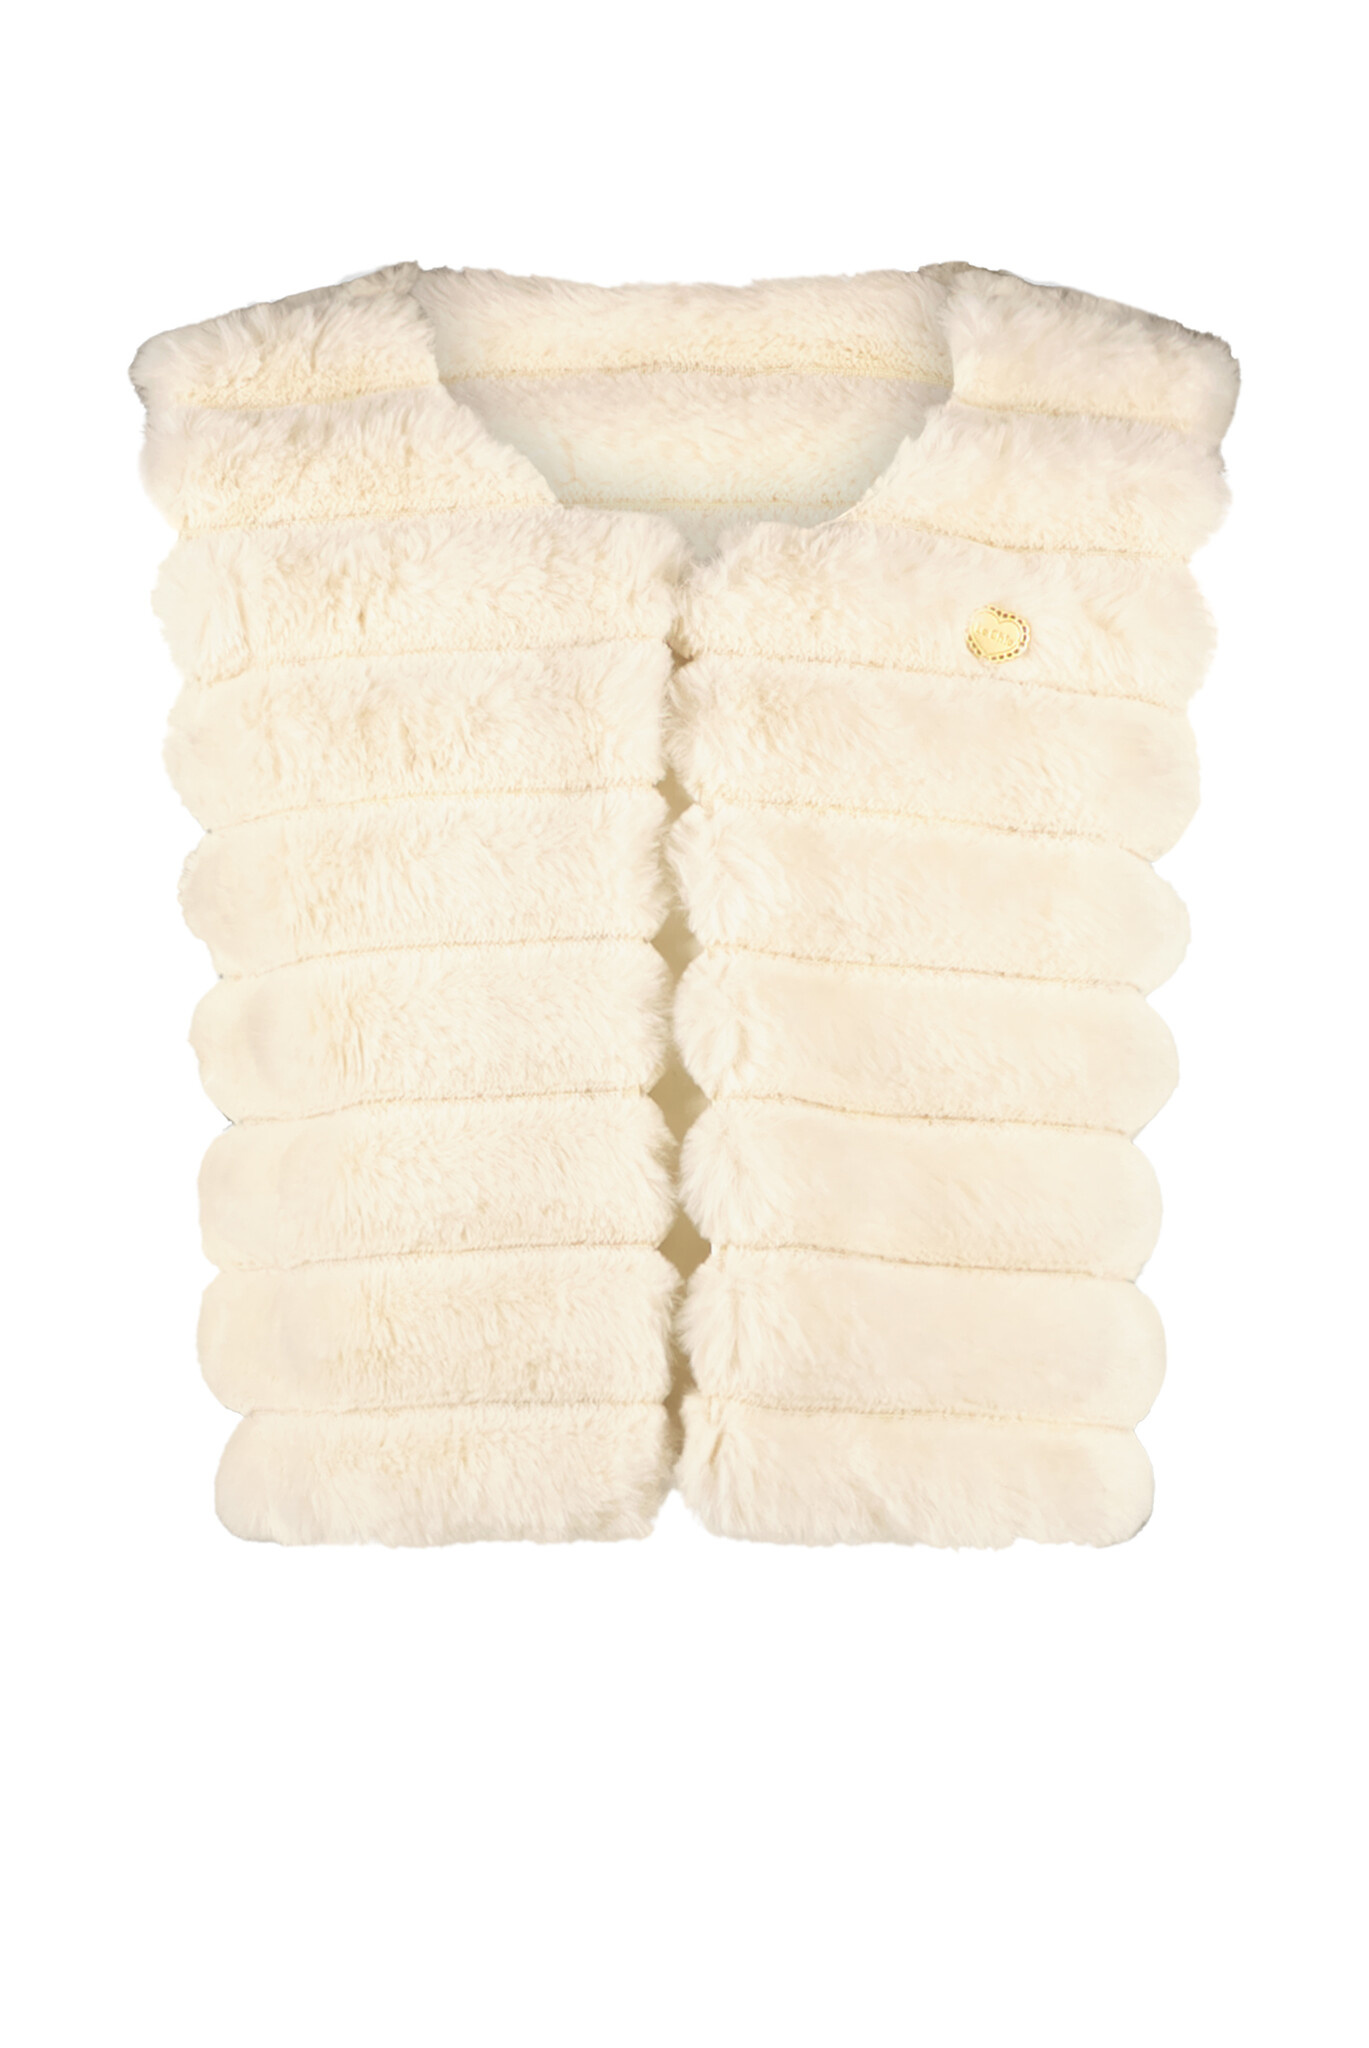 Le Chic C308-5106 Meisjes Gilet - Pearled Ivory - Maat 128